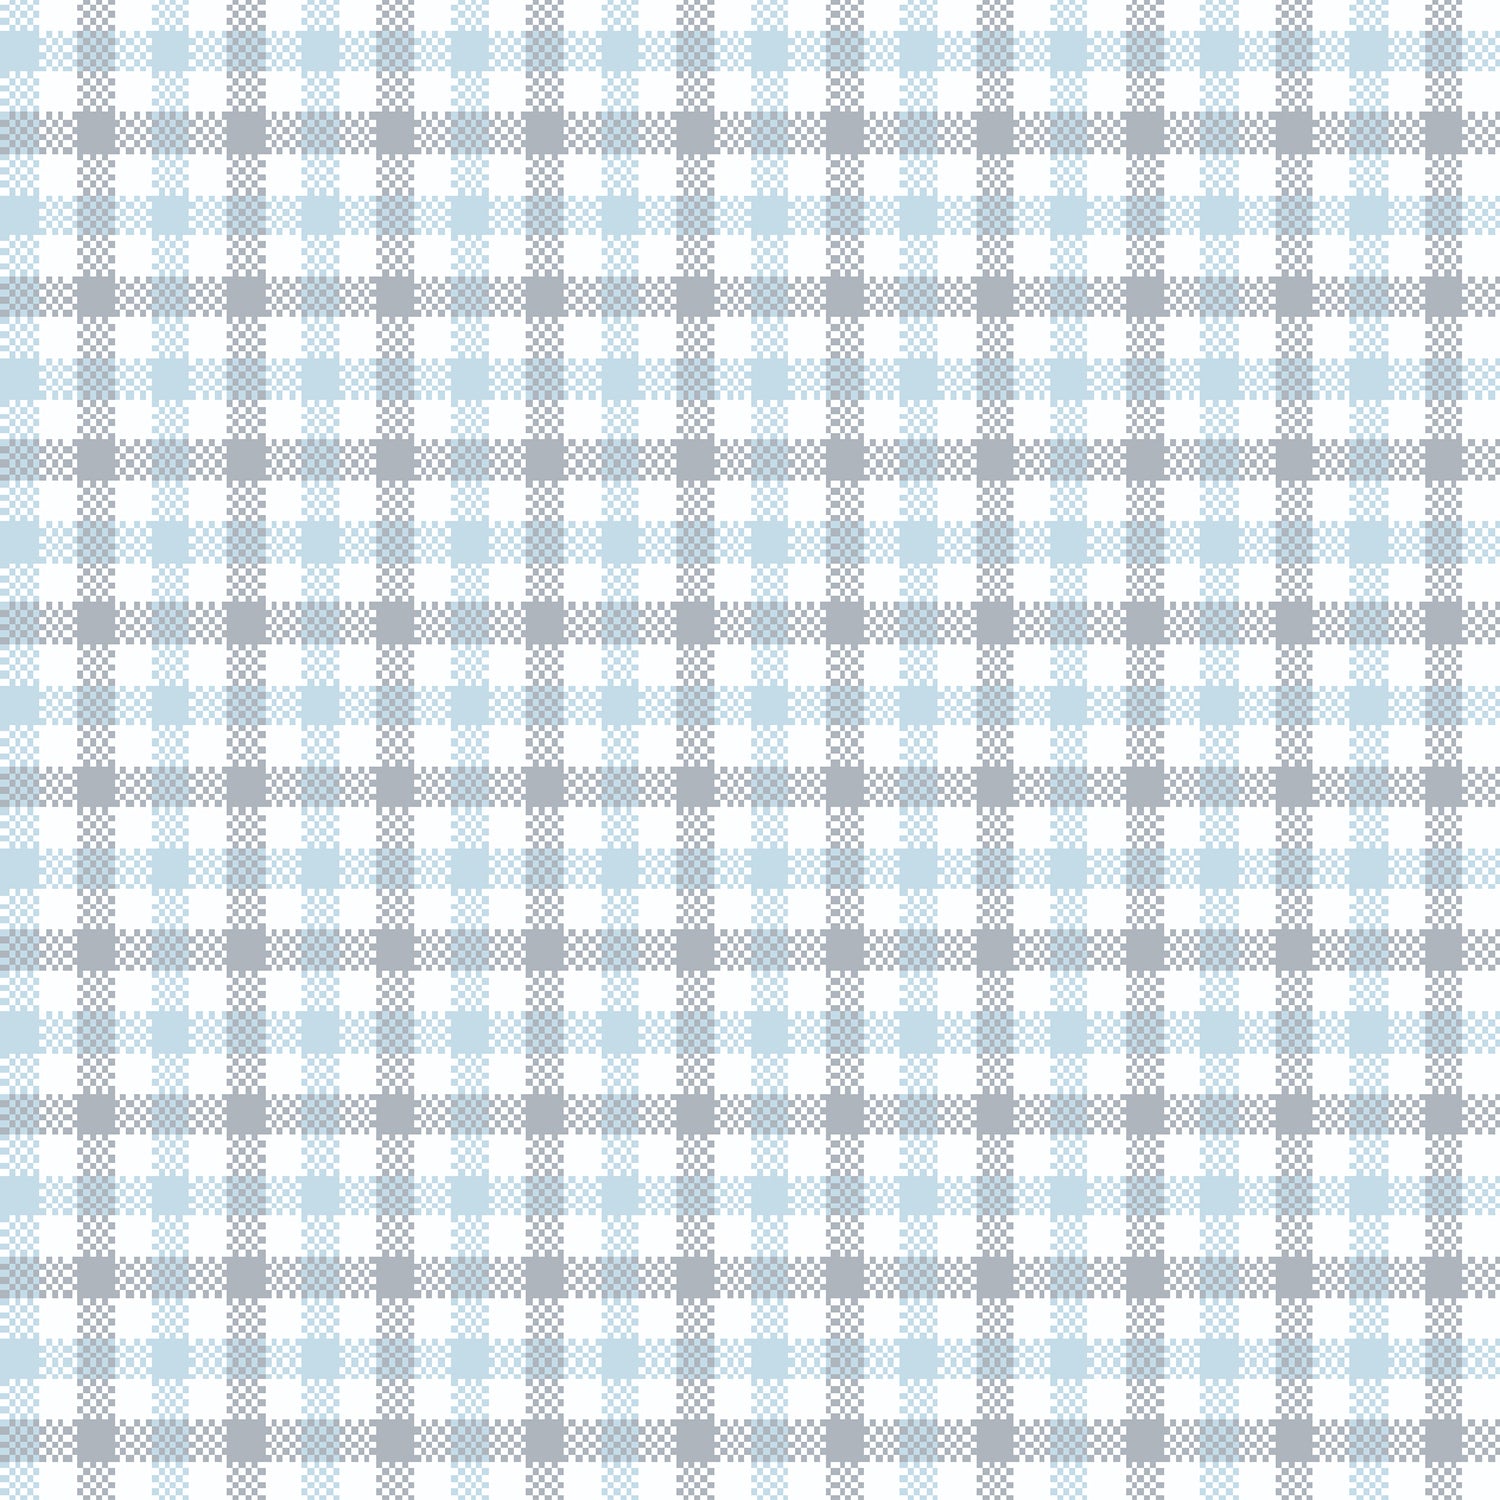 Waverly Inspirations Cotton 44" Plaid Dew Gray Color Sewing Fabric by the Yard